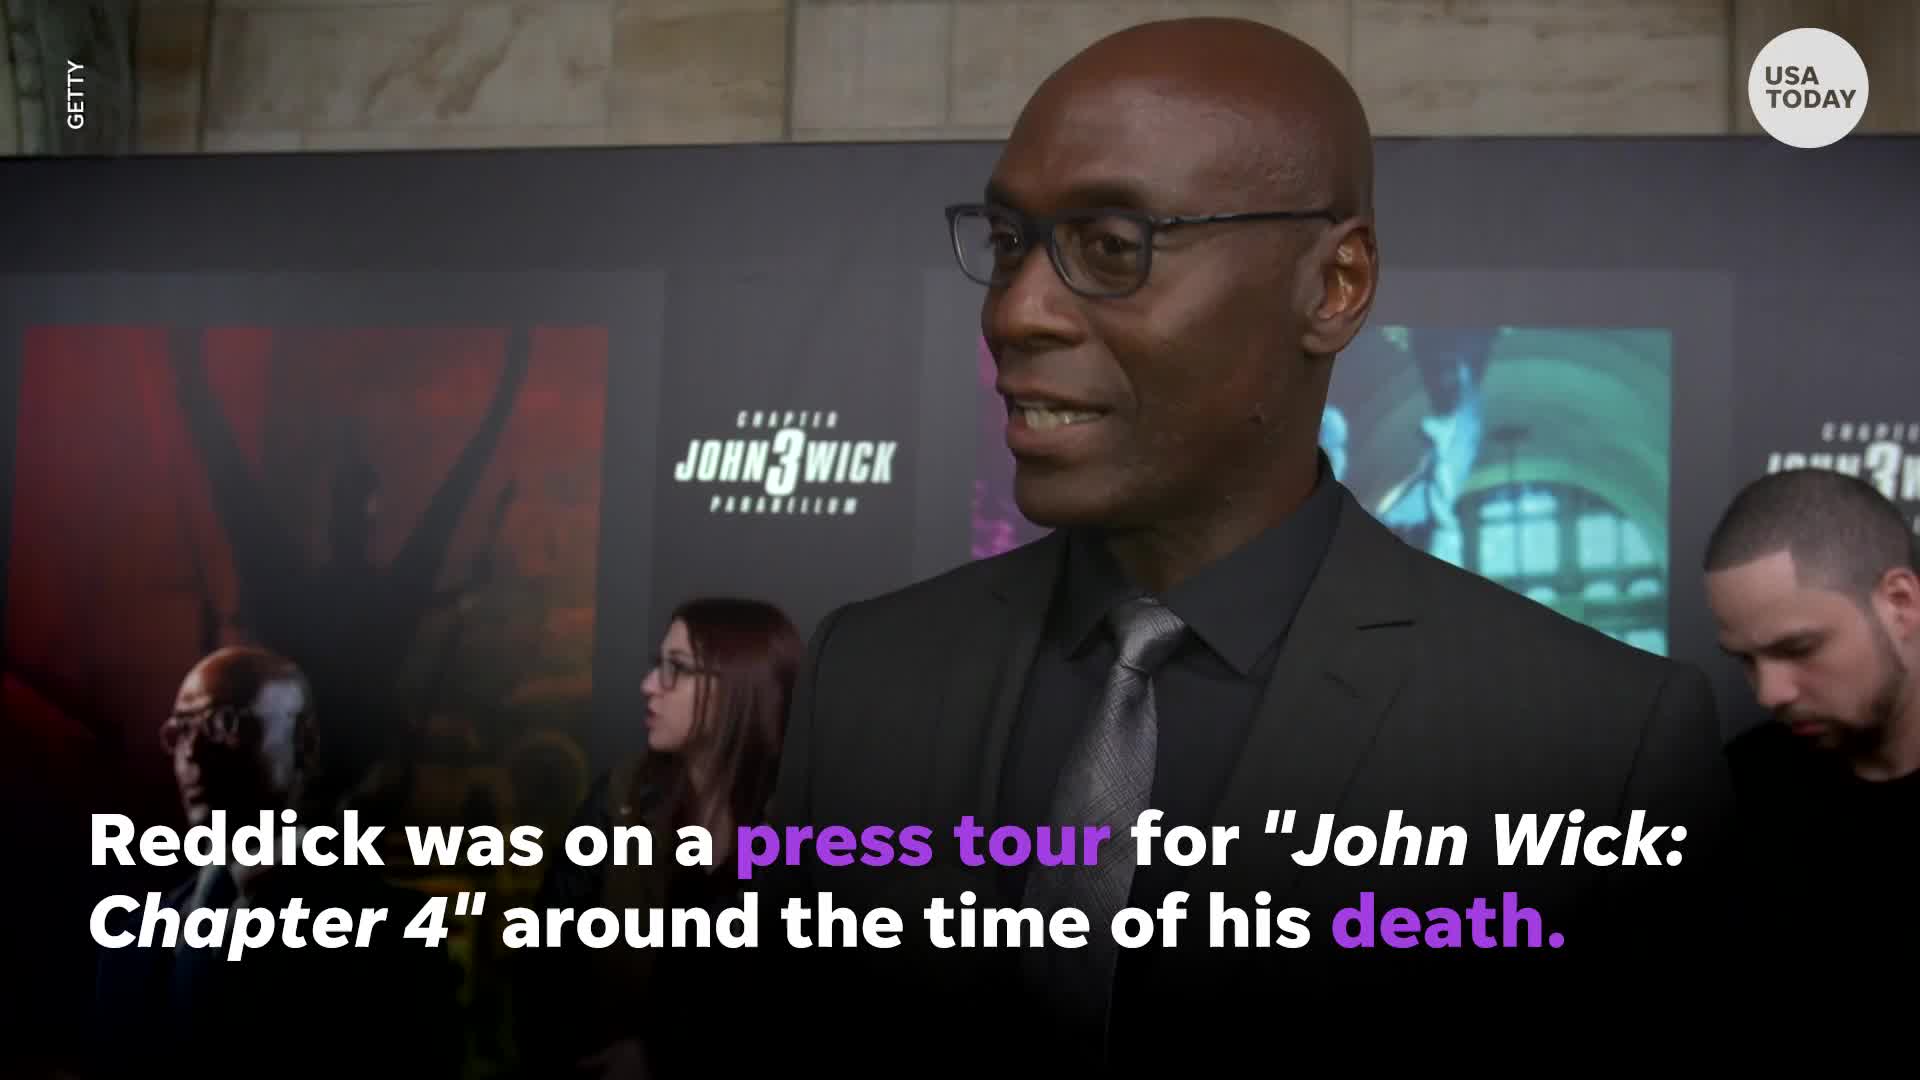 Keanu Reeves Honors Late Co-Star Lance Reddick Days After His Death